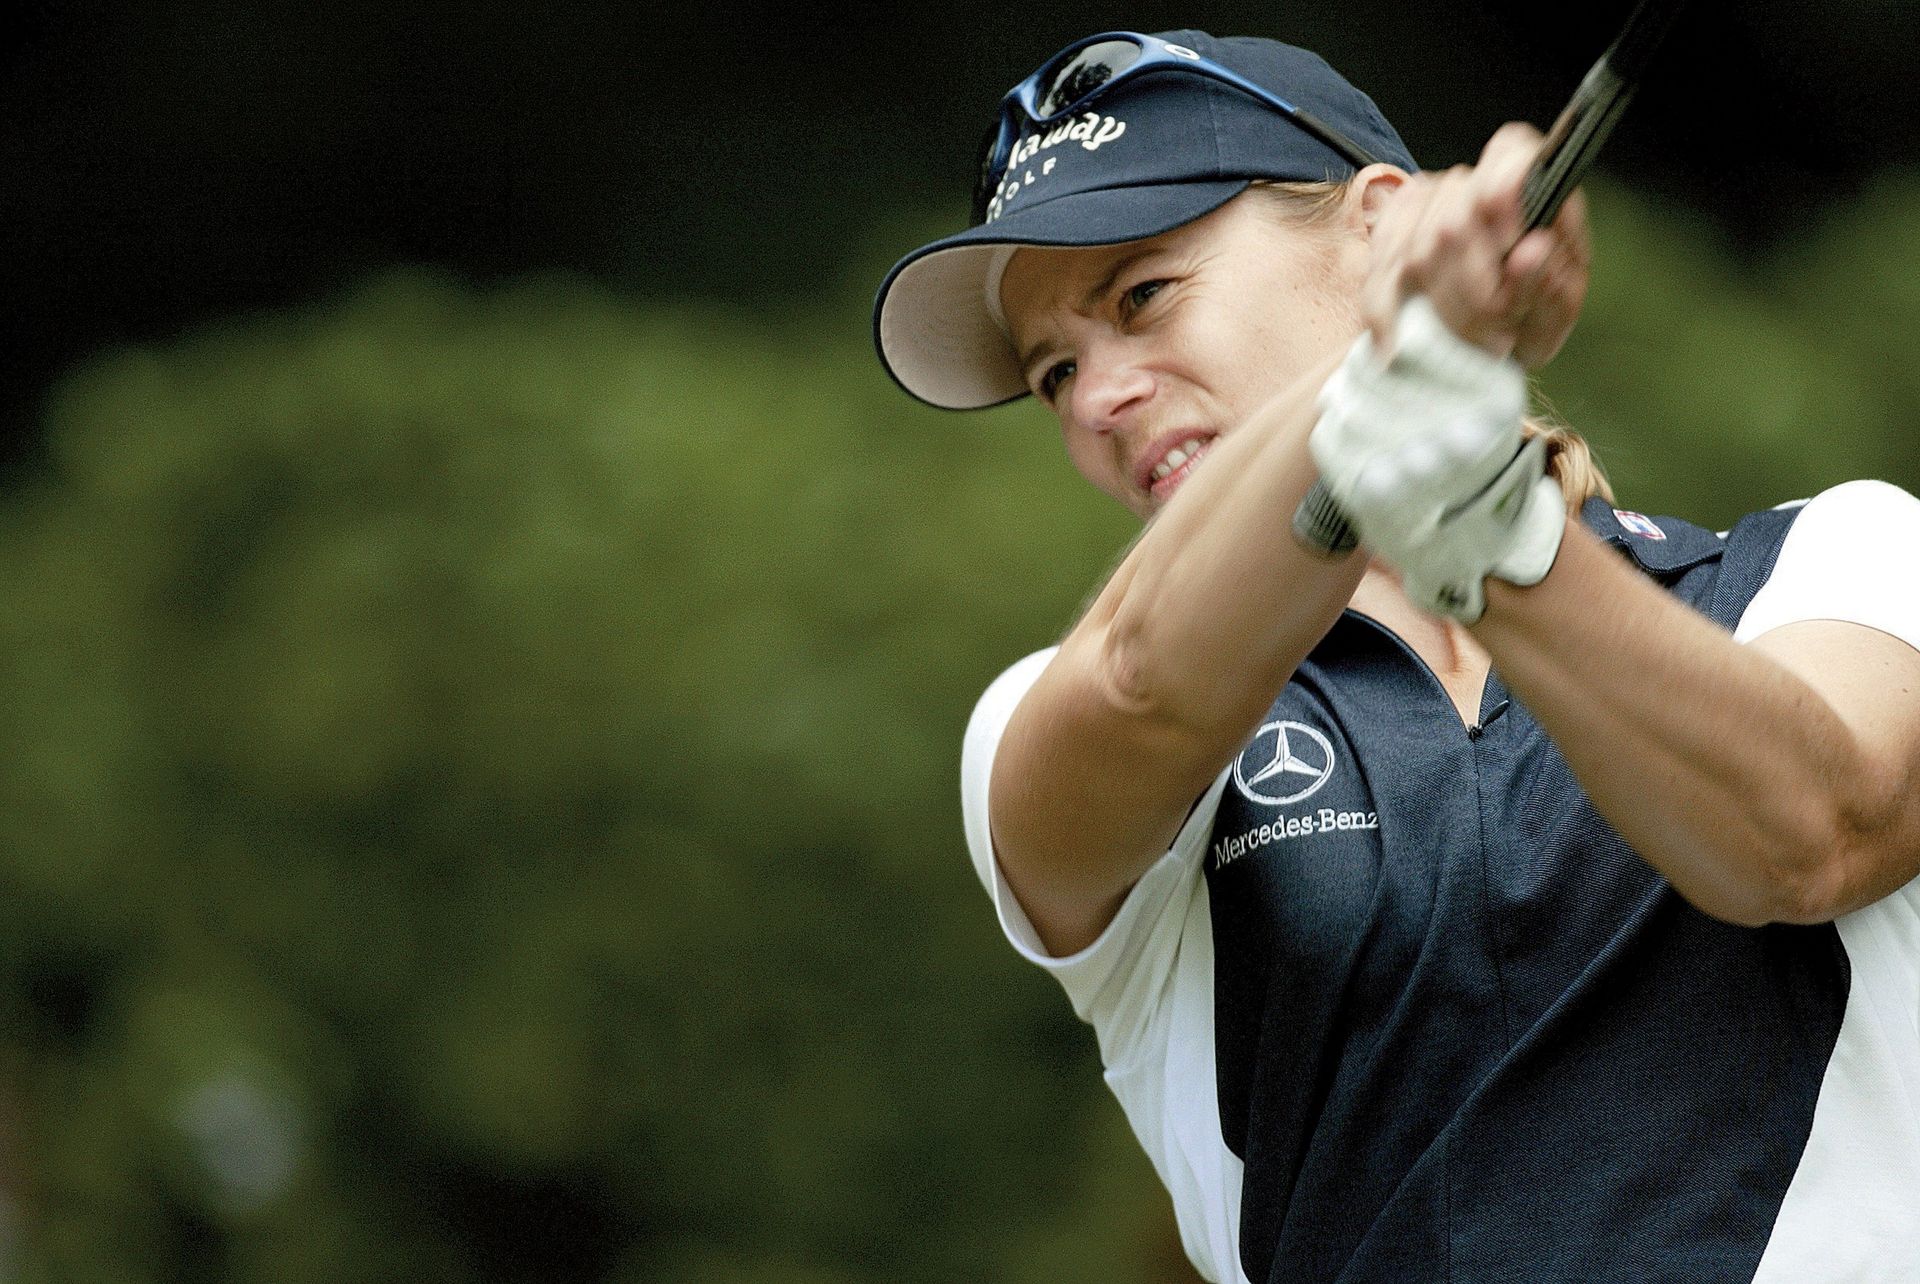 <p>                     The Swede took the women’s game to a new level in the 1990s. At the peak of her powers, she was in a league of her own, winning 72 times on the LPGA Tour, 10 of which were Major Championships. In 2003, she became the first player since Babe Zaharias to play in a men's PGA Tour event. Her consistency was remarkable, as was her swing tempo, something that never faltered under pressure.                   </p>